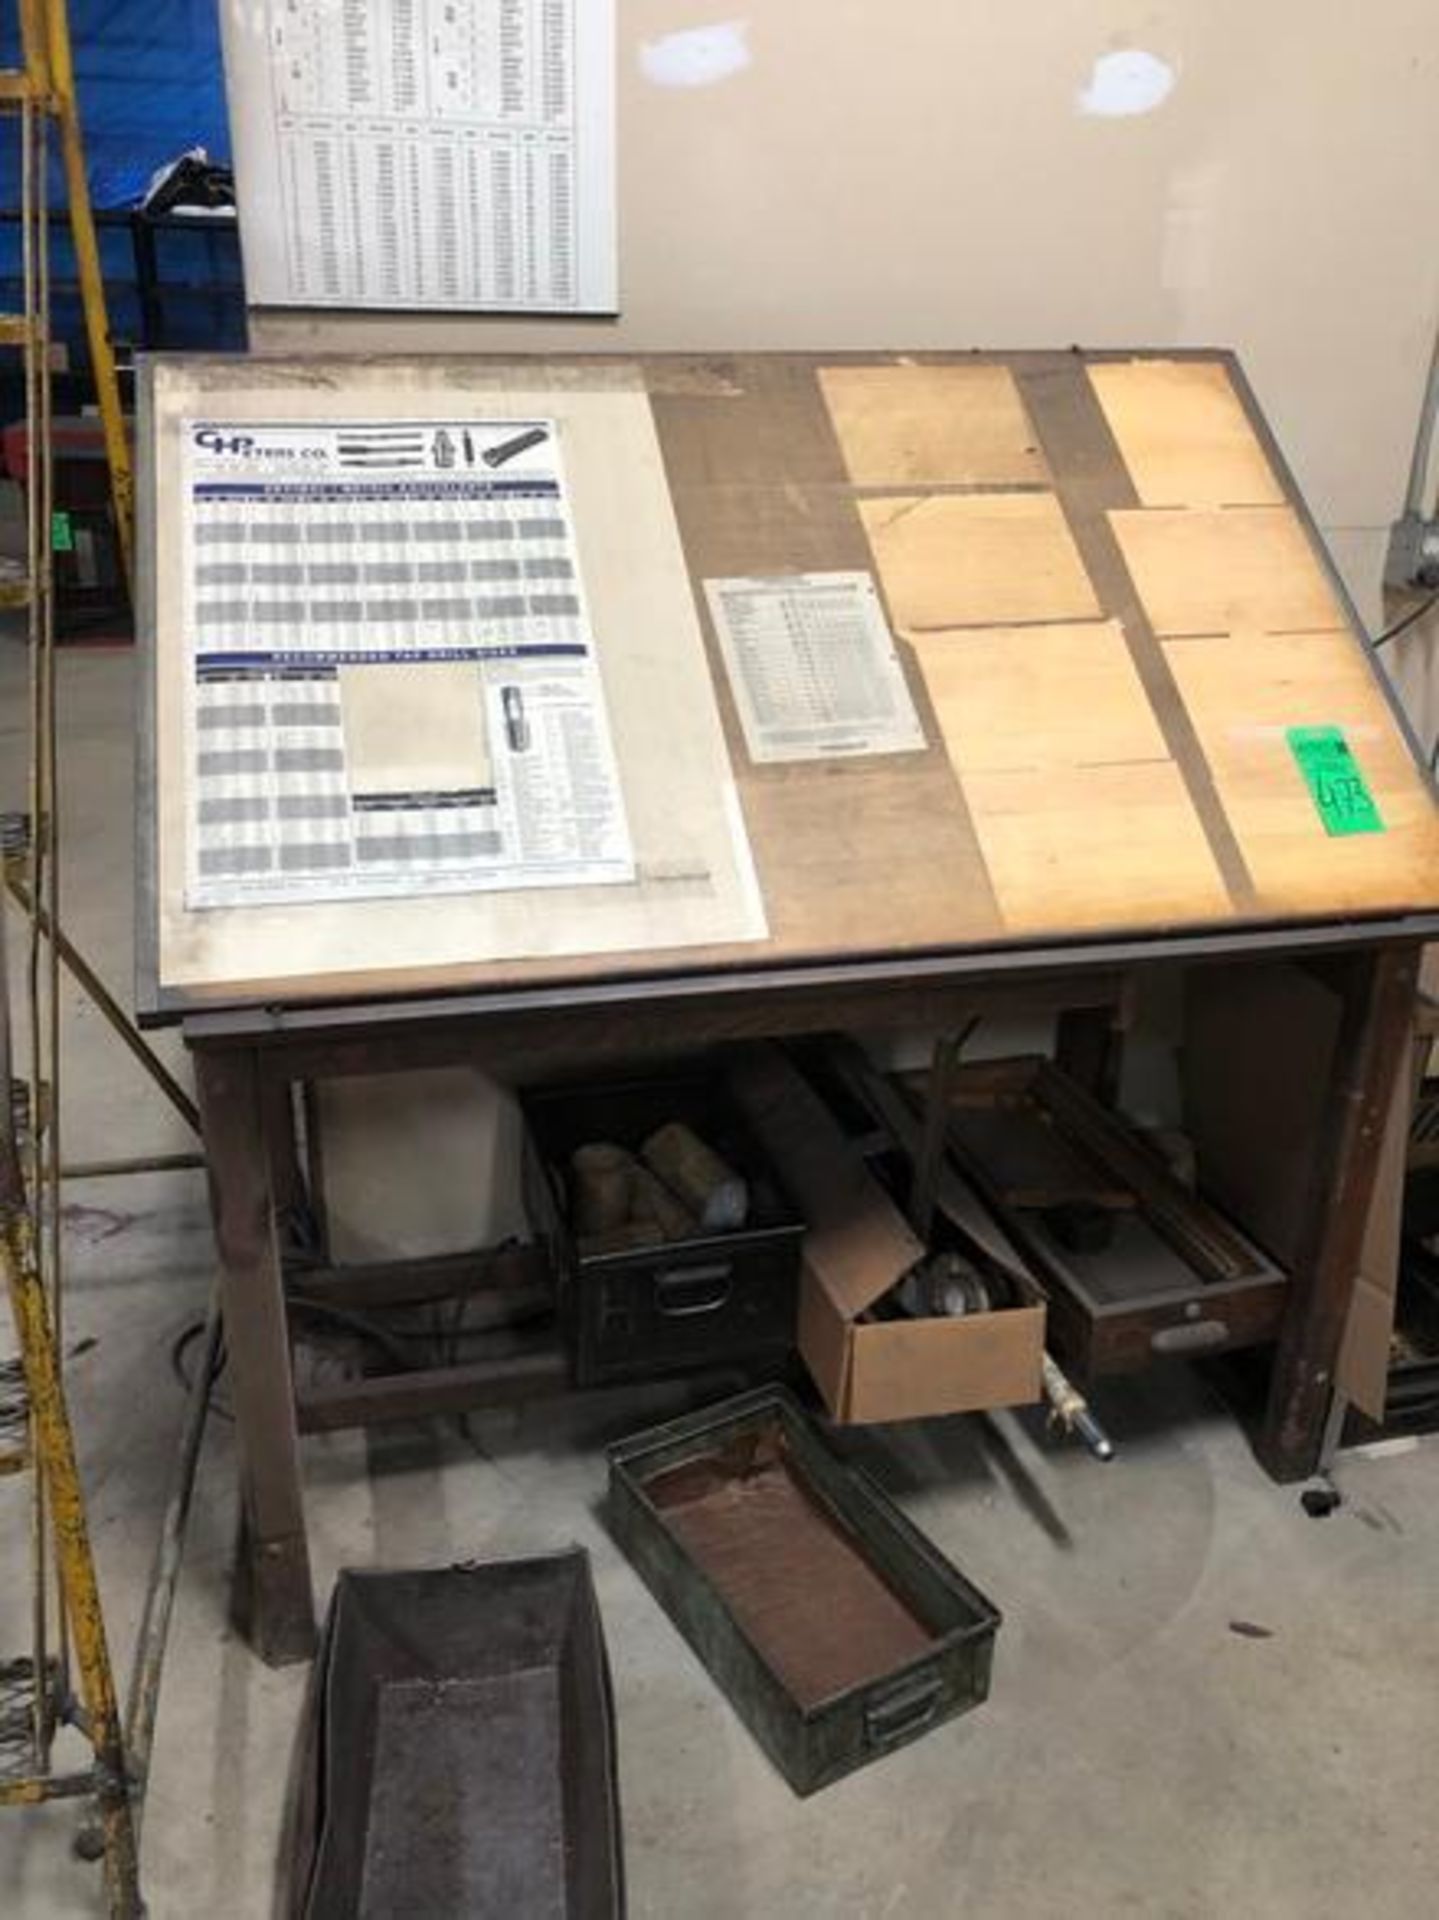 Studio Drafting Table size 42" x 23.5" w/Contents